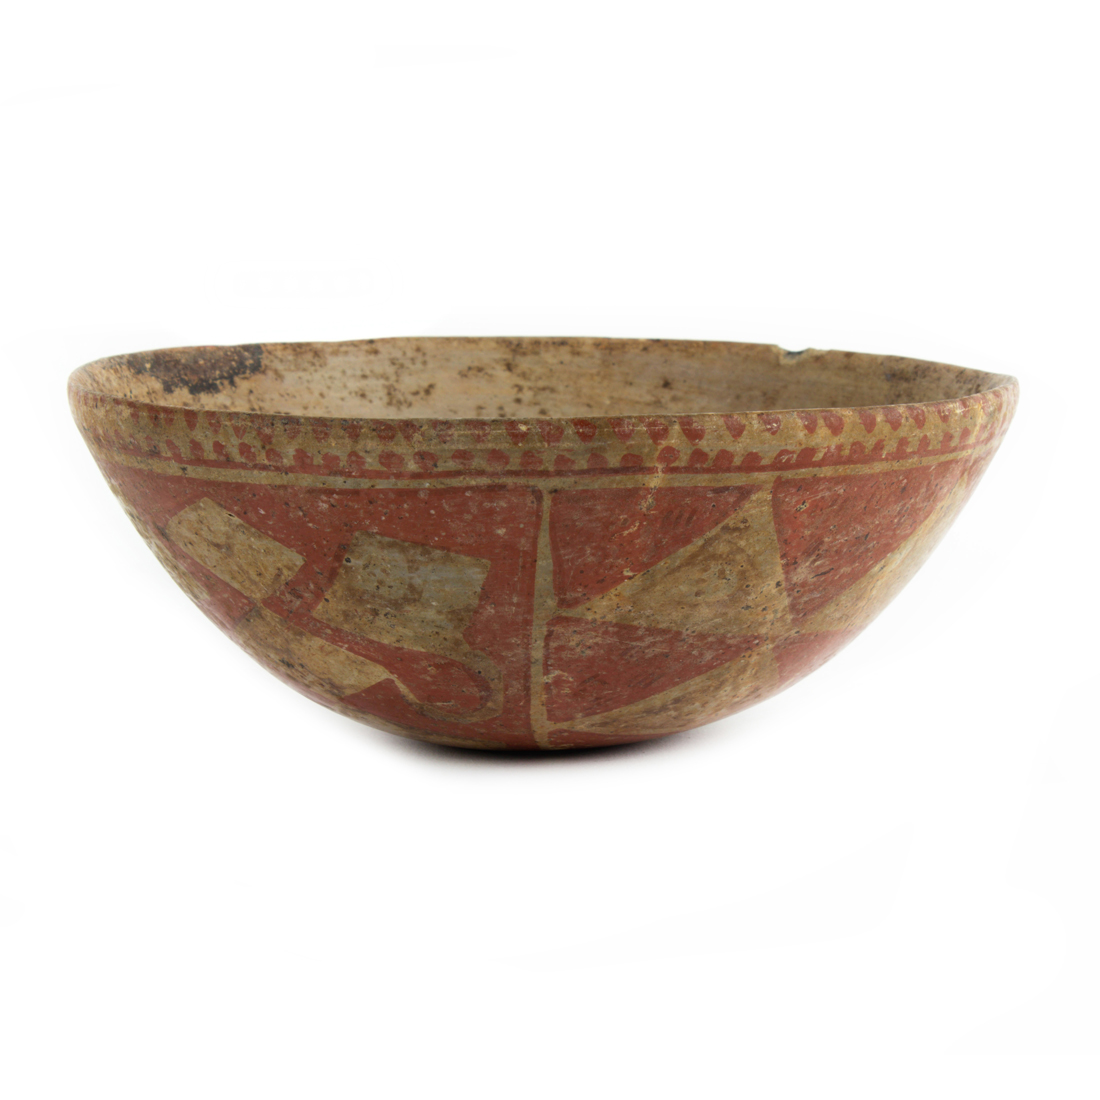 MAYAN RED PAINTED OFFERING BOWL 3a238a